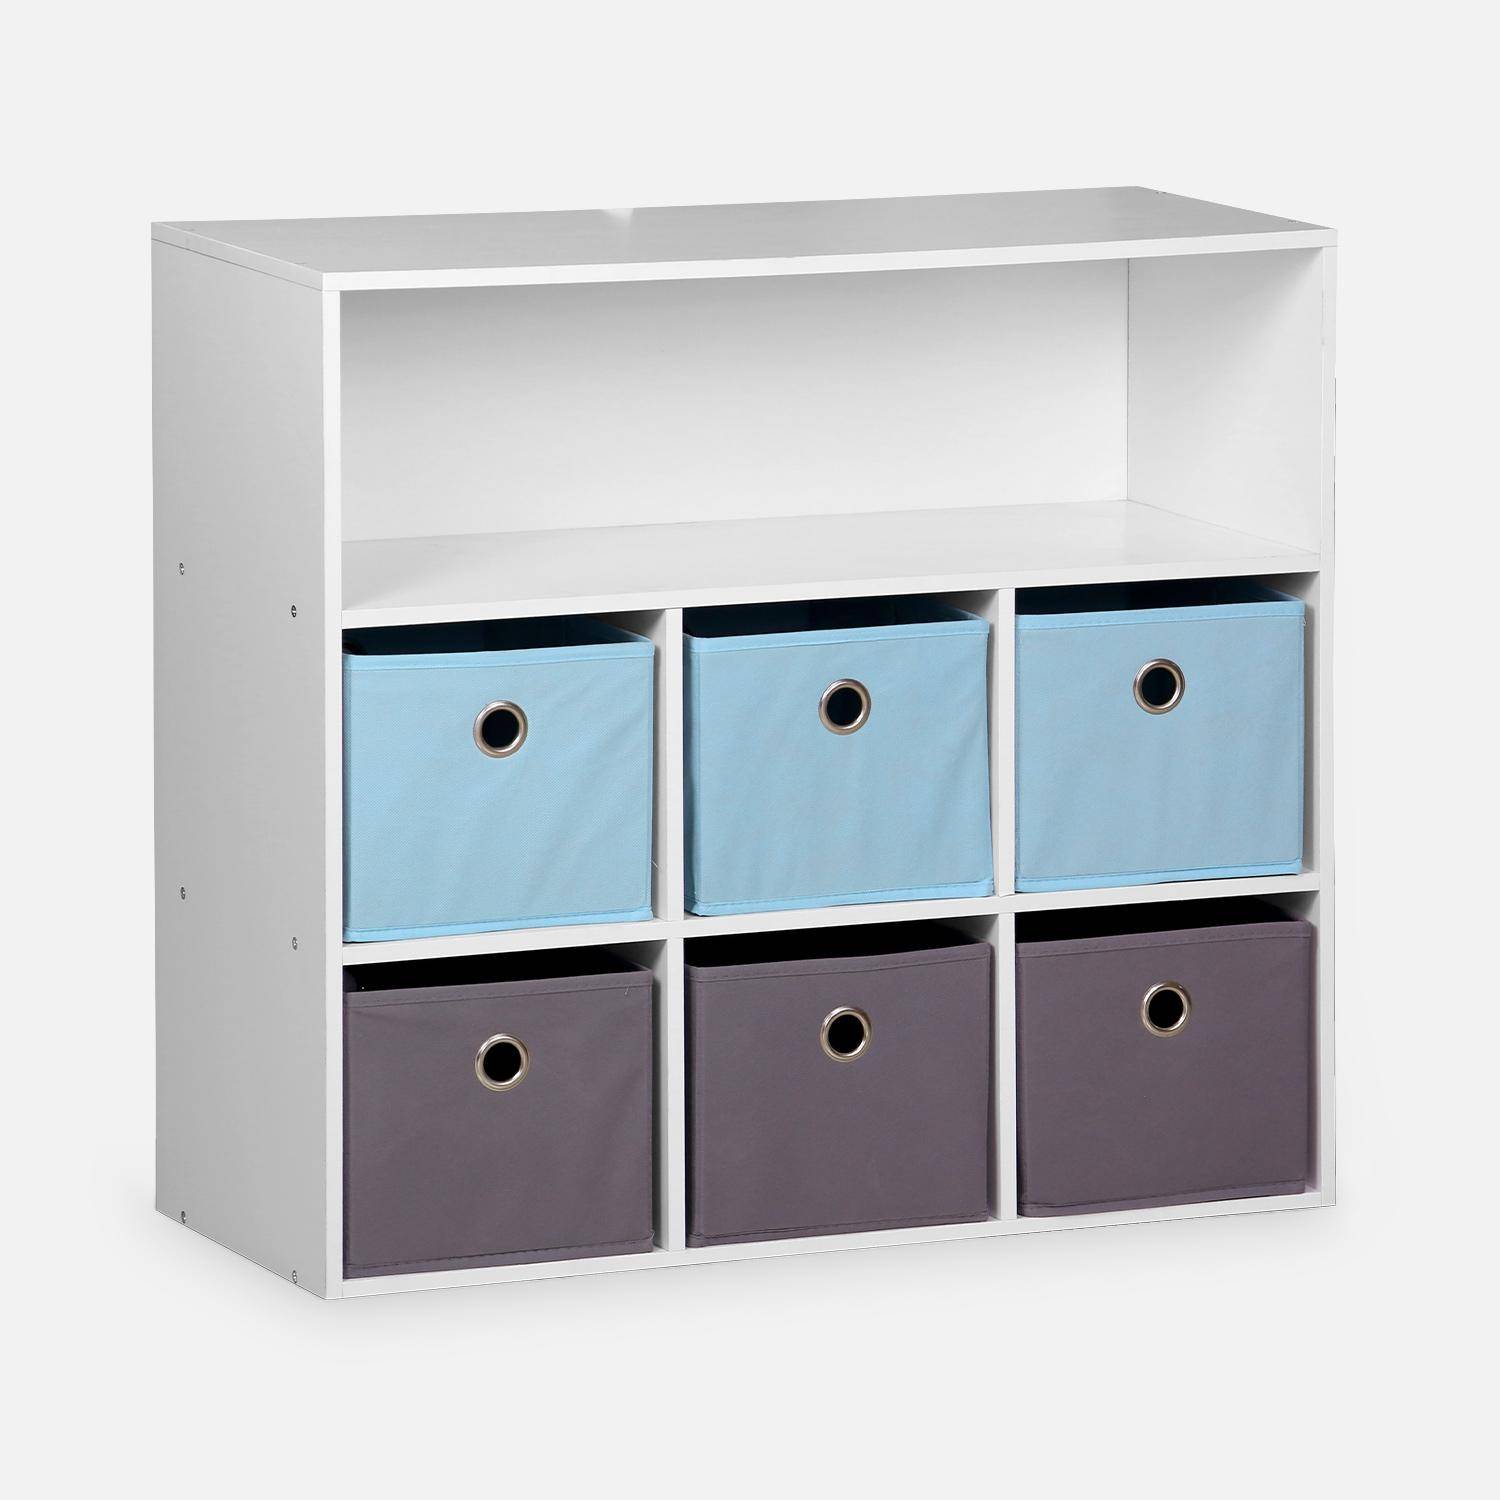 Storage unit for children, white - Camille - with 7 compartments and 6 baskets in grey and blue,sweeek,Photo3